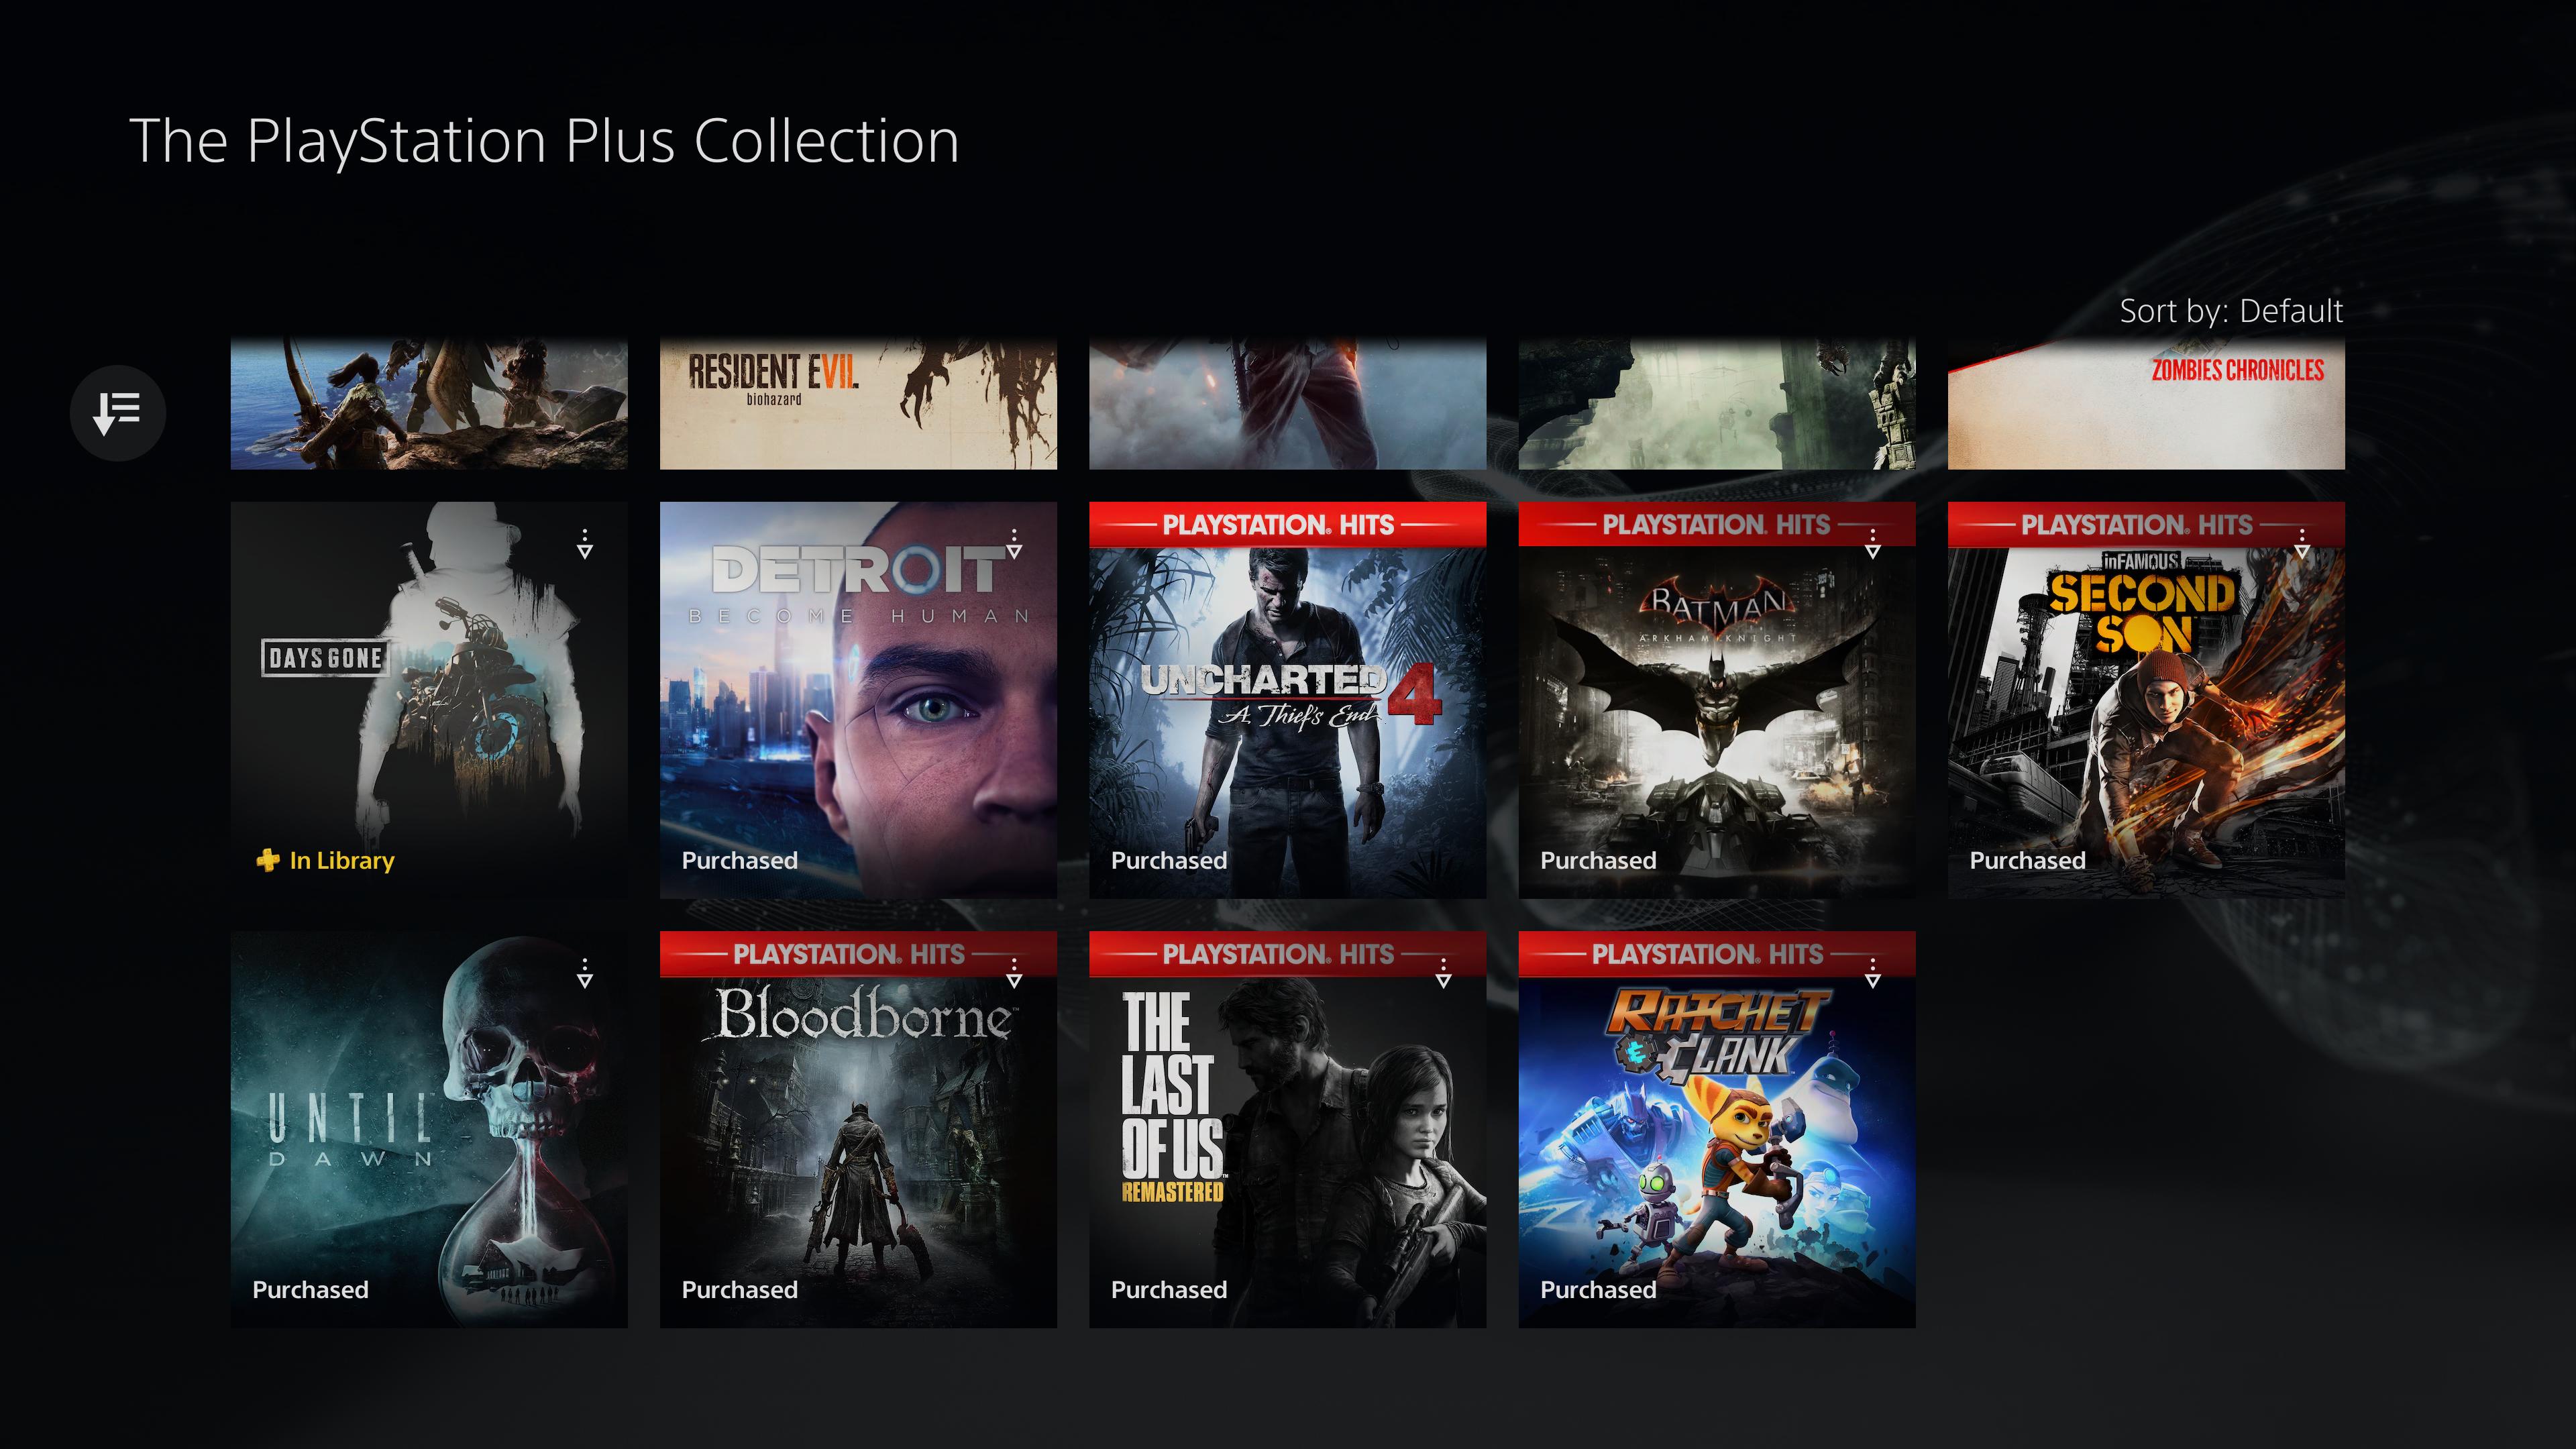 PS Plus - the PS Plus Collection, full of impressive blockbusters like Uncharted 4 and Arkham Knight.